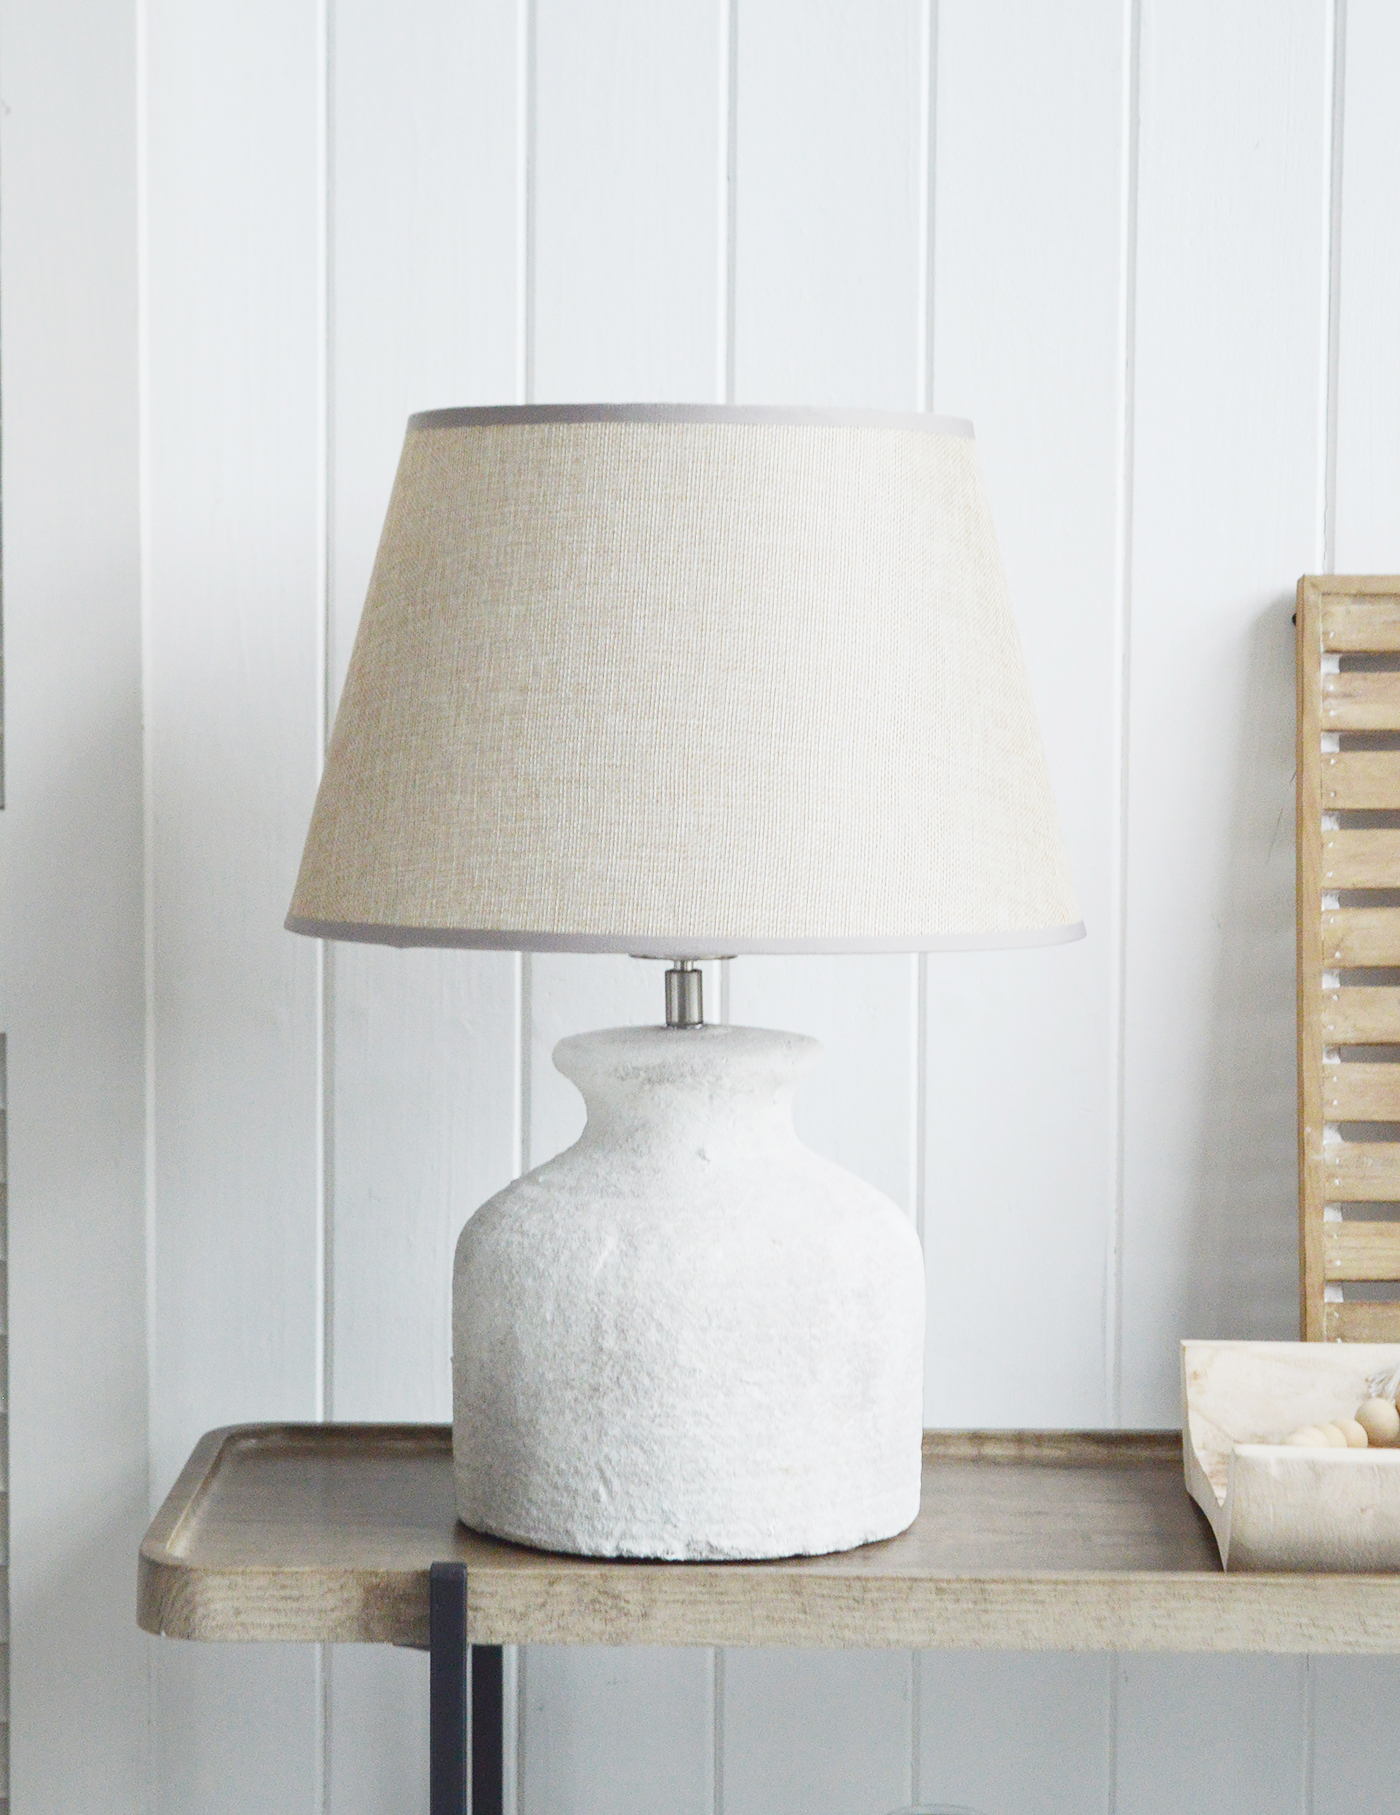 Barnstead Pale Grey Stone Lamp from The White Lighthouse Furniture. A lovely table lamp for bedside table or living room or bedroom furniture. New England style table lamps for country, coastal, citu and farmhouse styled homes